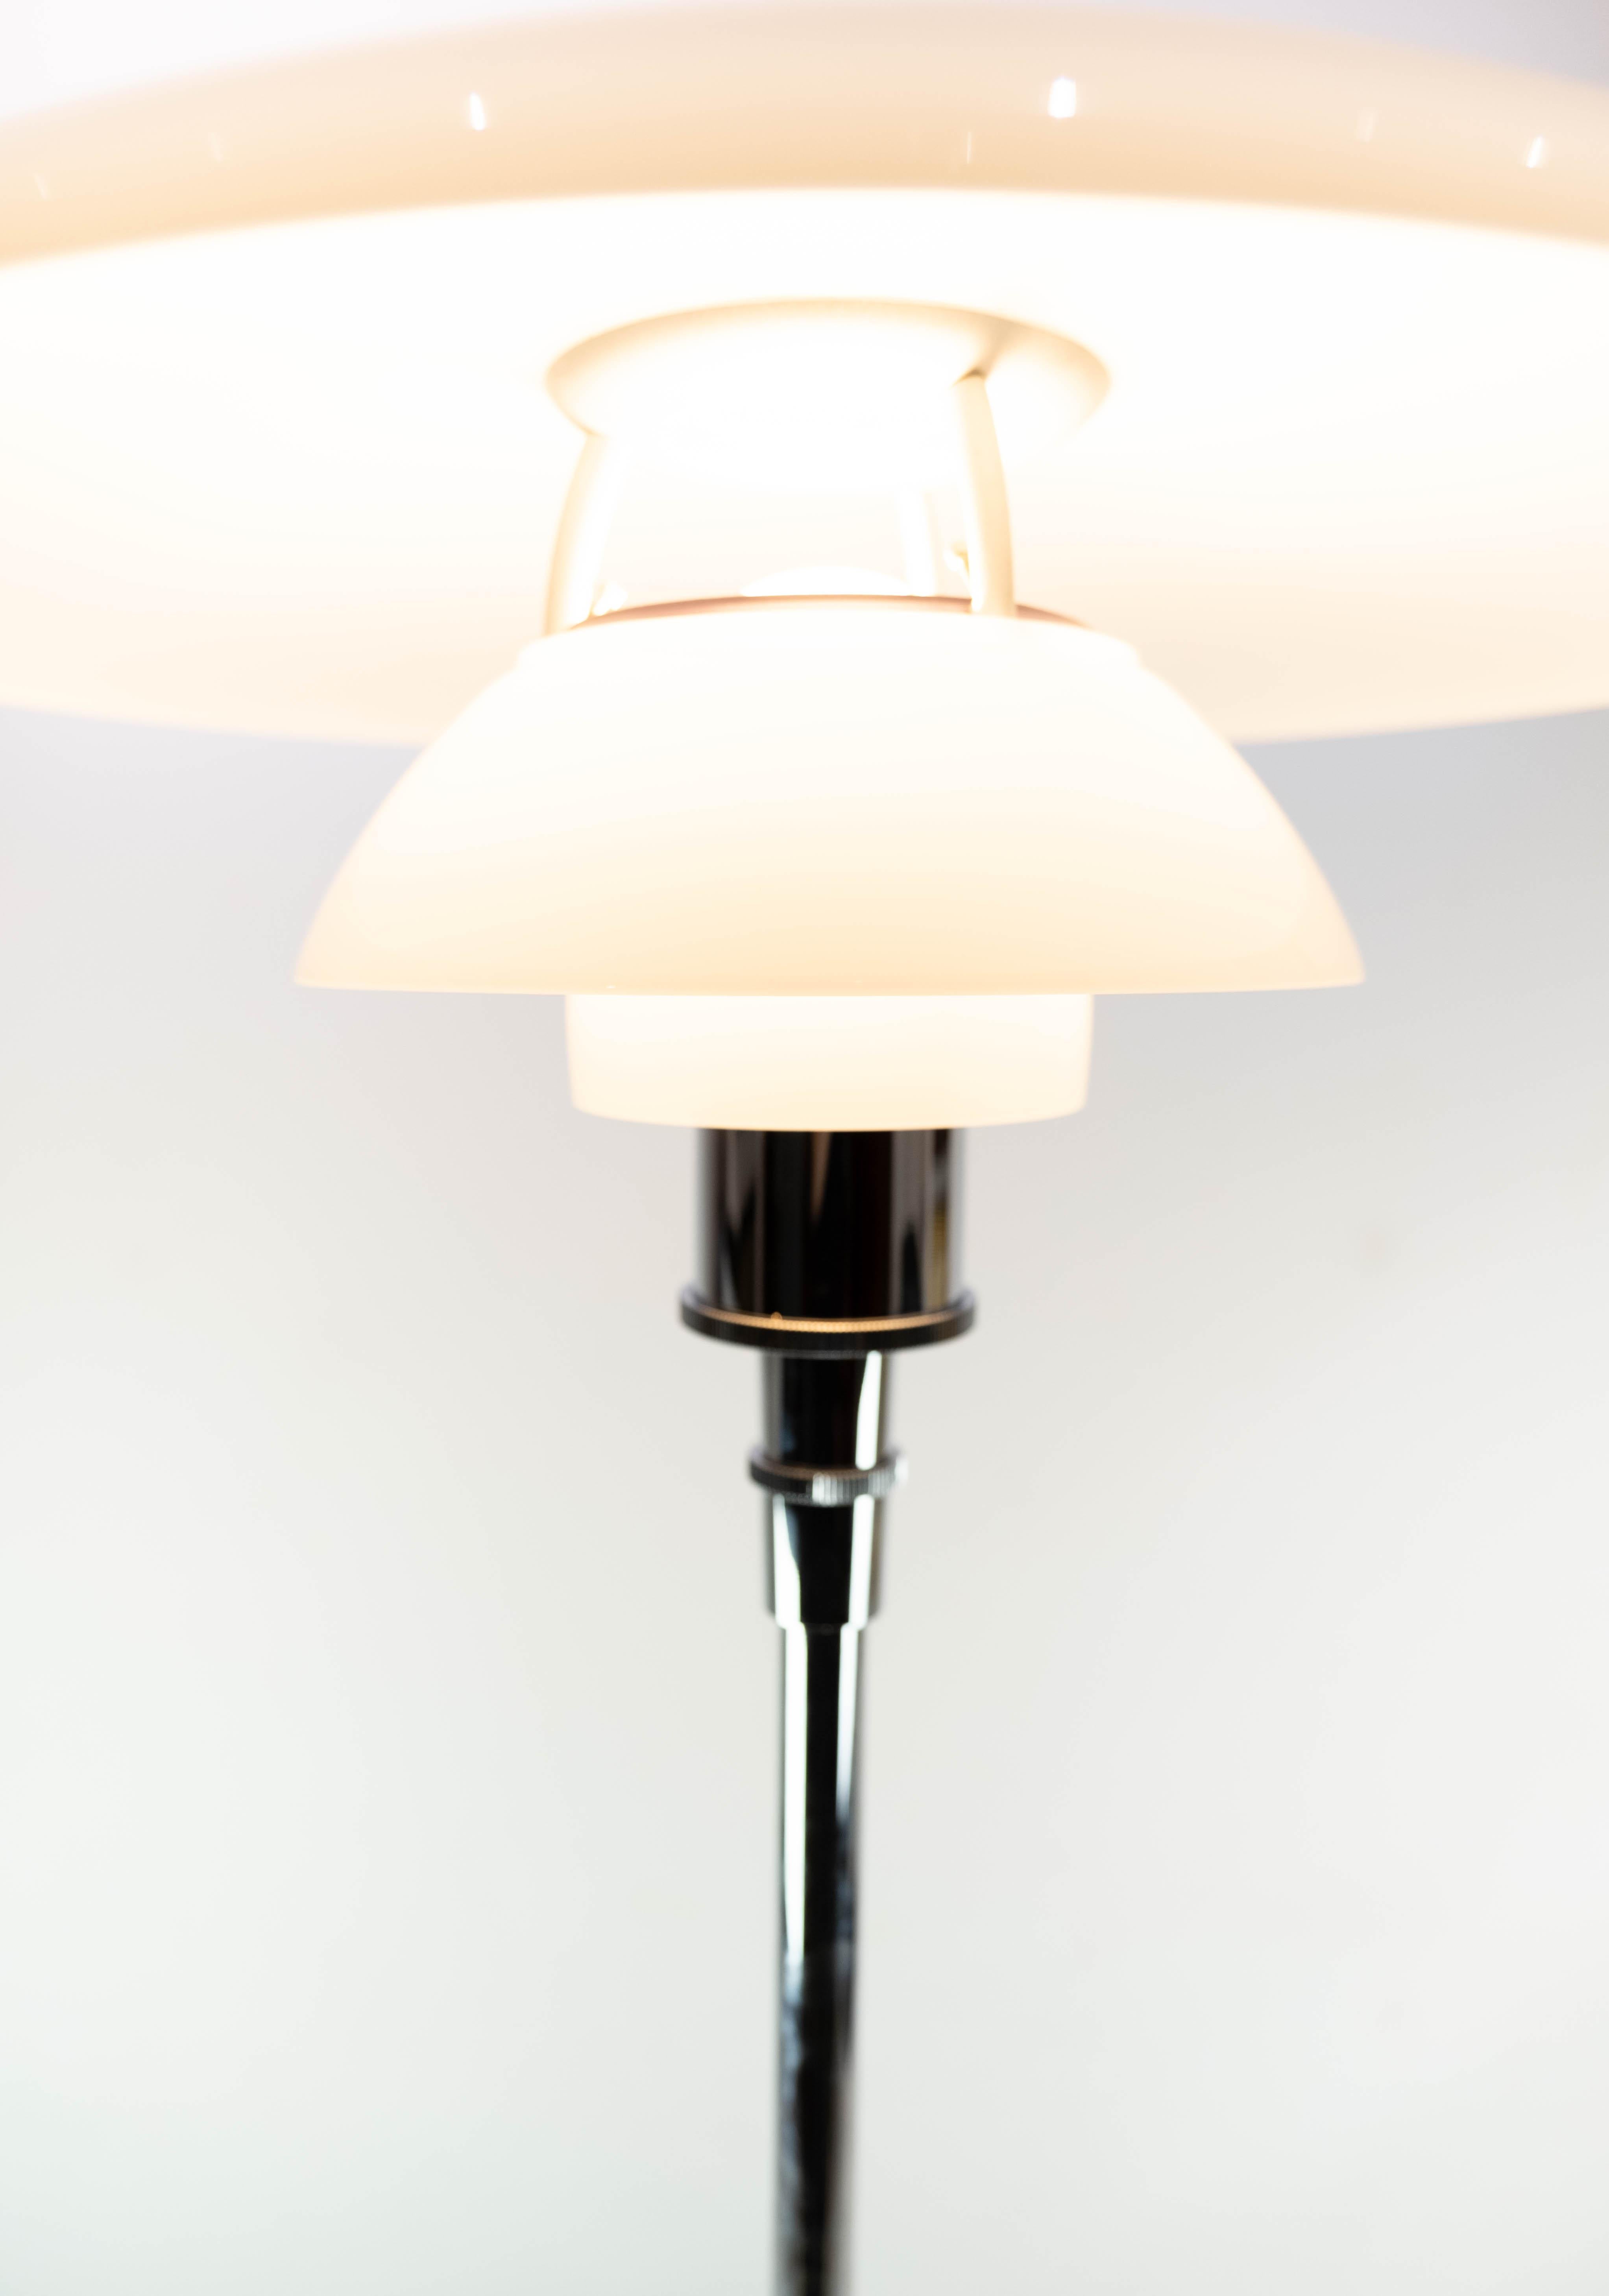 Ph 4 1/2-3 1/2 Floor Lamp of Chrome with Shades of Opaline Glass In Good Condition For Sale In Lejre, DK